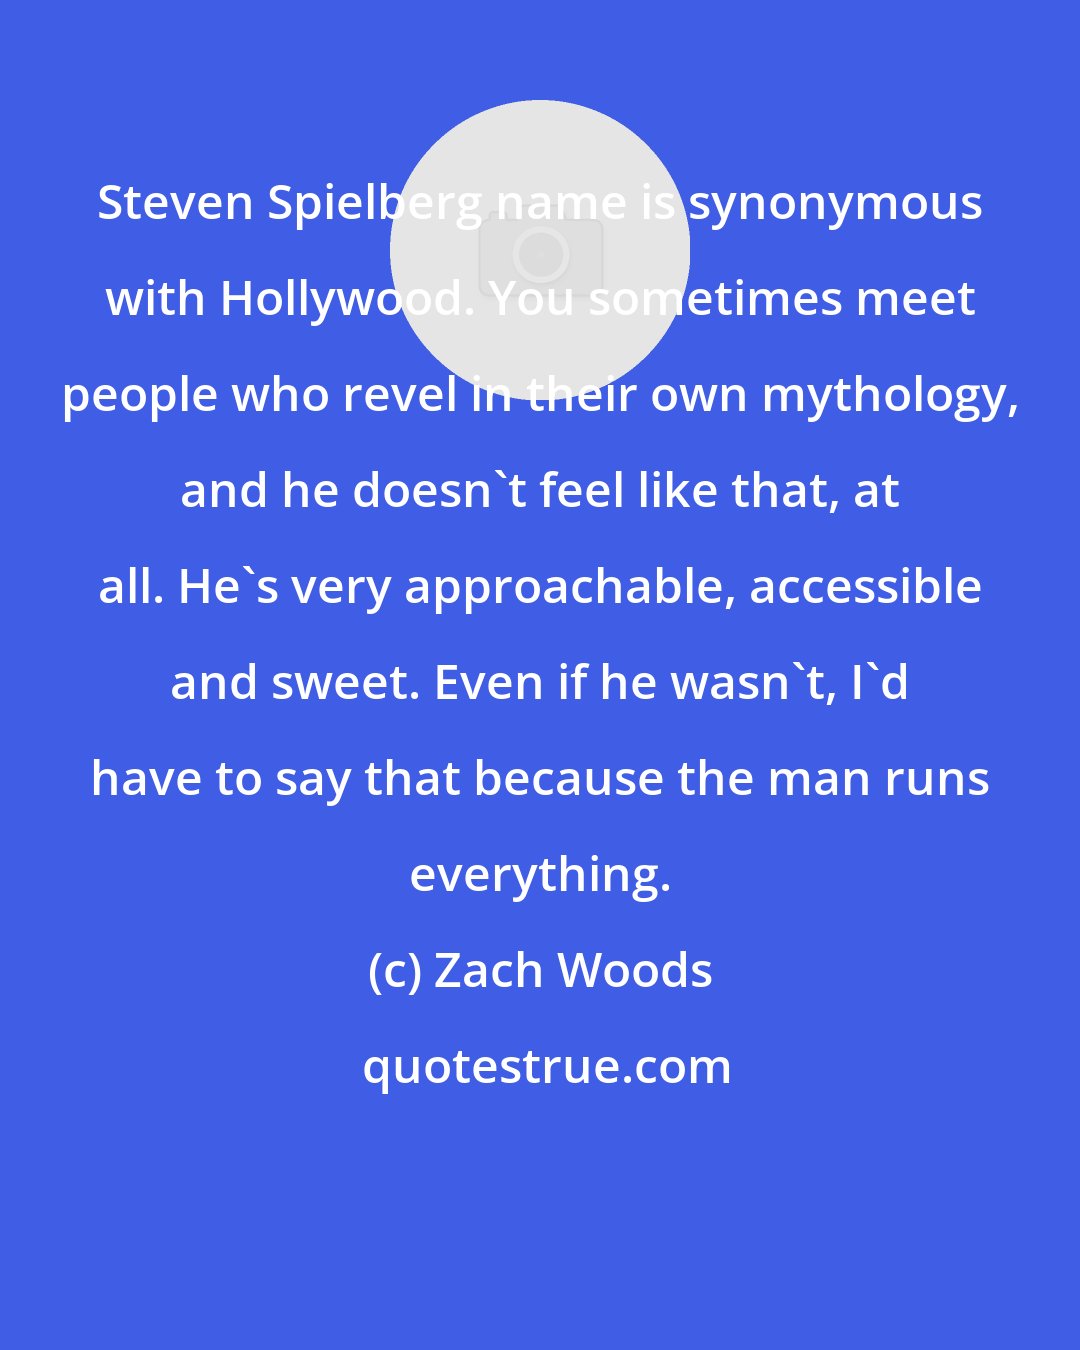 Zach Woods: Steven Spielberg name is synonymous with Hollywood. You sometimes meet people who revel in their own mythology, and he doesn't feel like that, at all. He's very approachable, accessible and sweet. Even if he wasn't, I'd have to say that because the man runs everything.